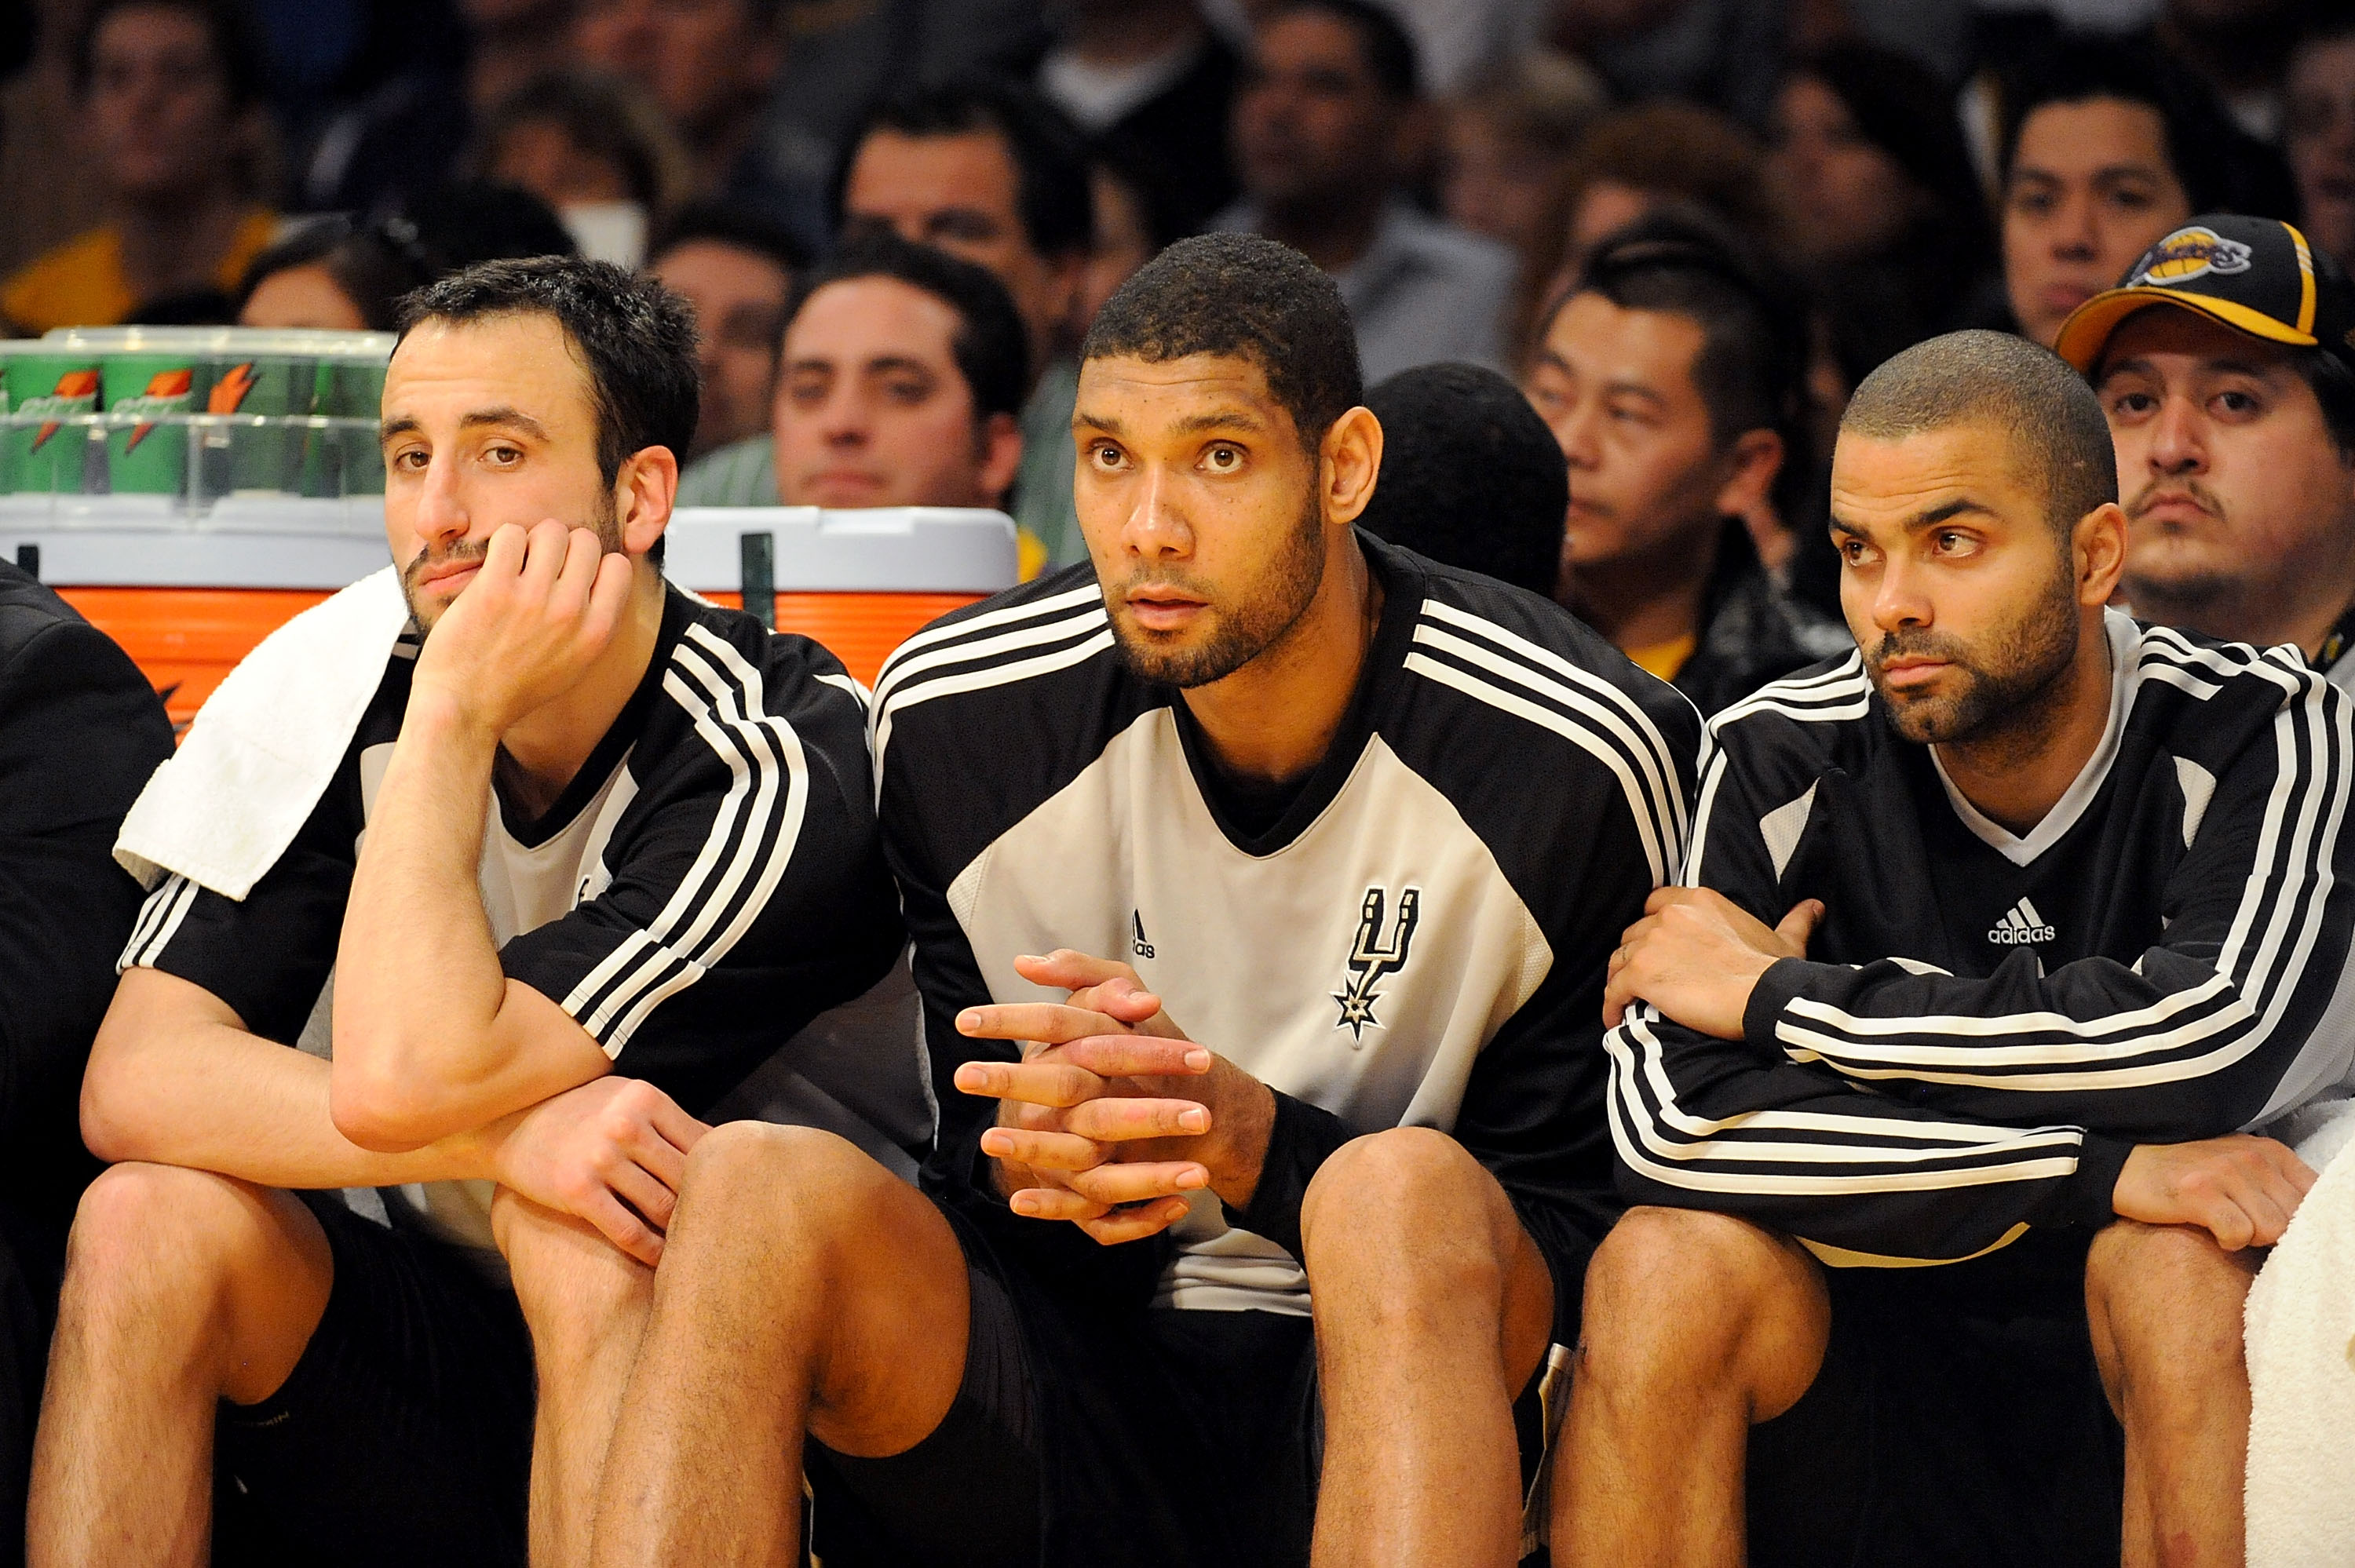 LOS ANGELES, CA - JANUARY 25:  (L-R) Manu Ginobili #20, Tim Duncan #21, and Tony Parker #9 of the San Antonio Spurs watch from the sidelines during the third quarter against the Los Angeles Lakers at the Staples Center on January 25, 2009 in Los Angeles,